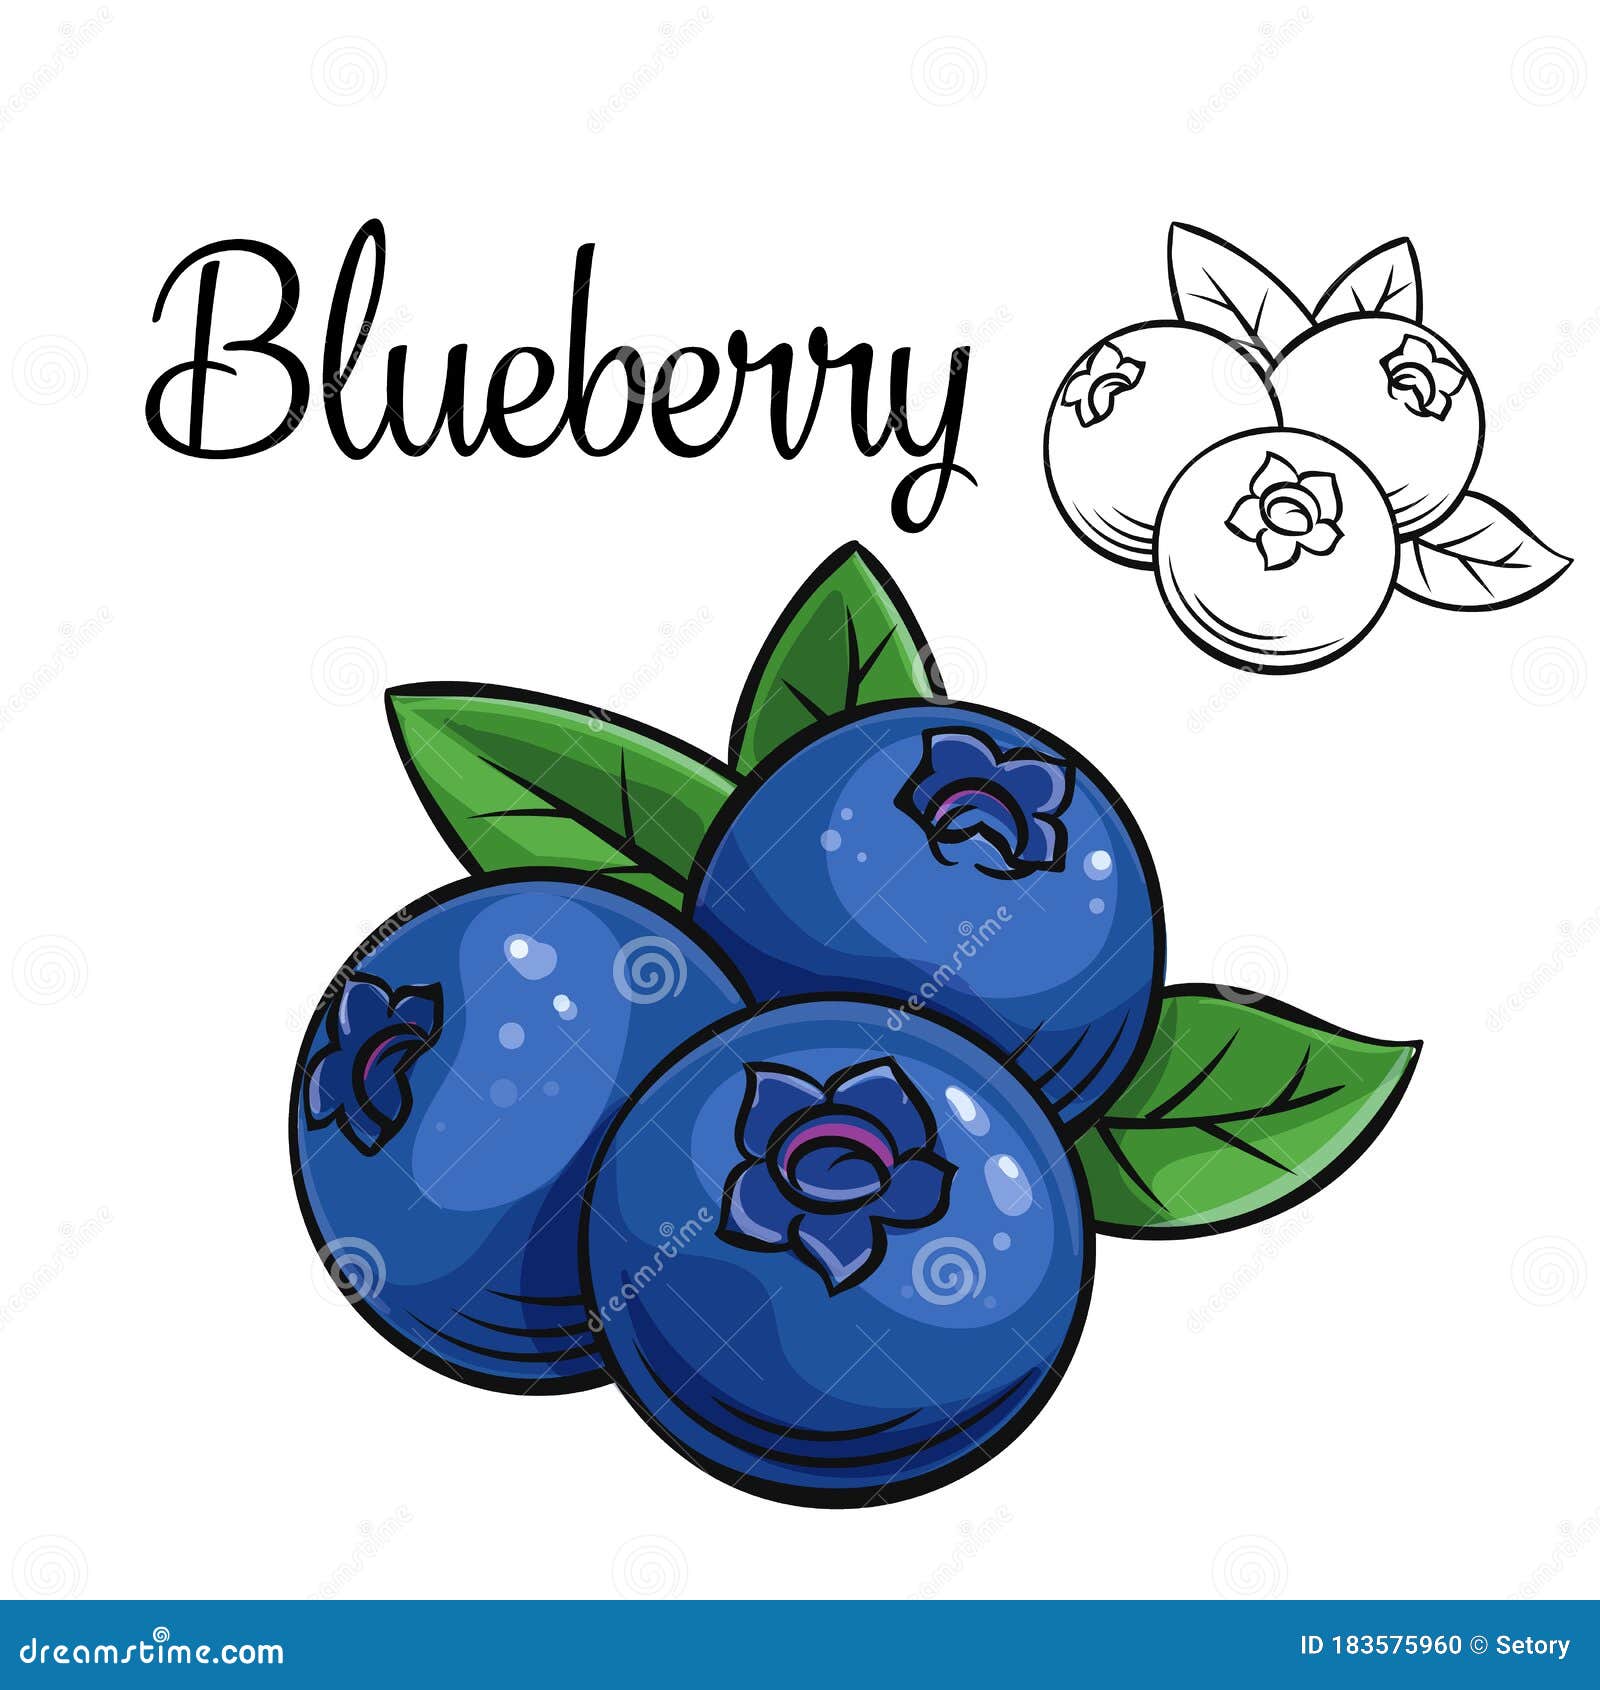 Blueberry Drawing Stock Illustrations 7 023 Blueberry Drawing Stock Illustrations Vectors Clipart Dreamstime See more ideas about blue fruits, light blue aesthetic, aqua turquoise. dreamstime com